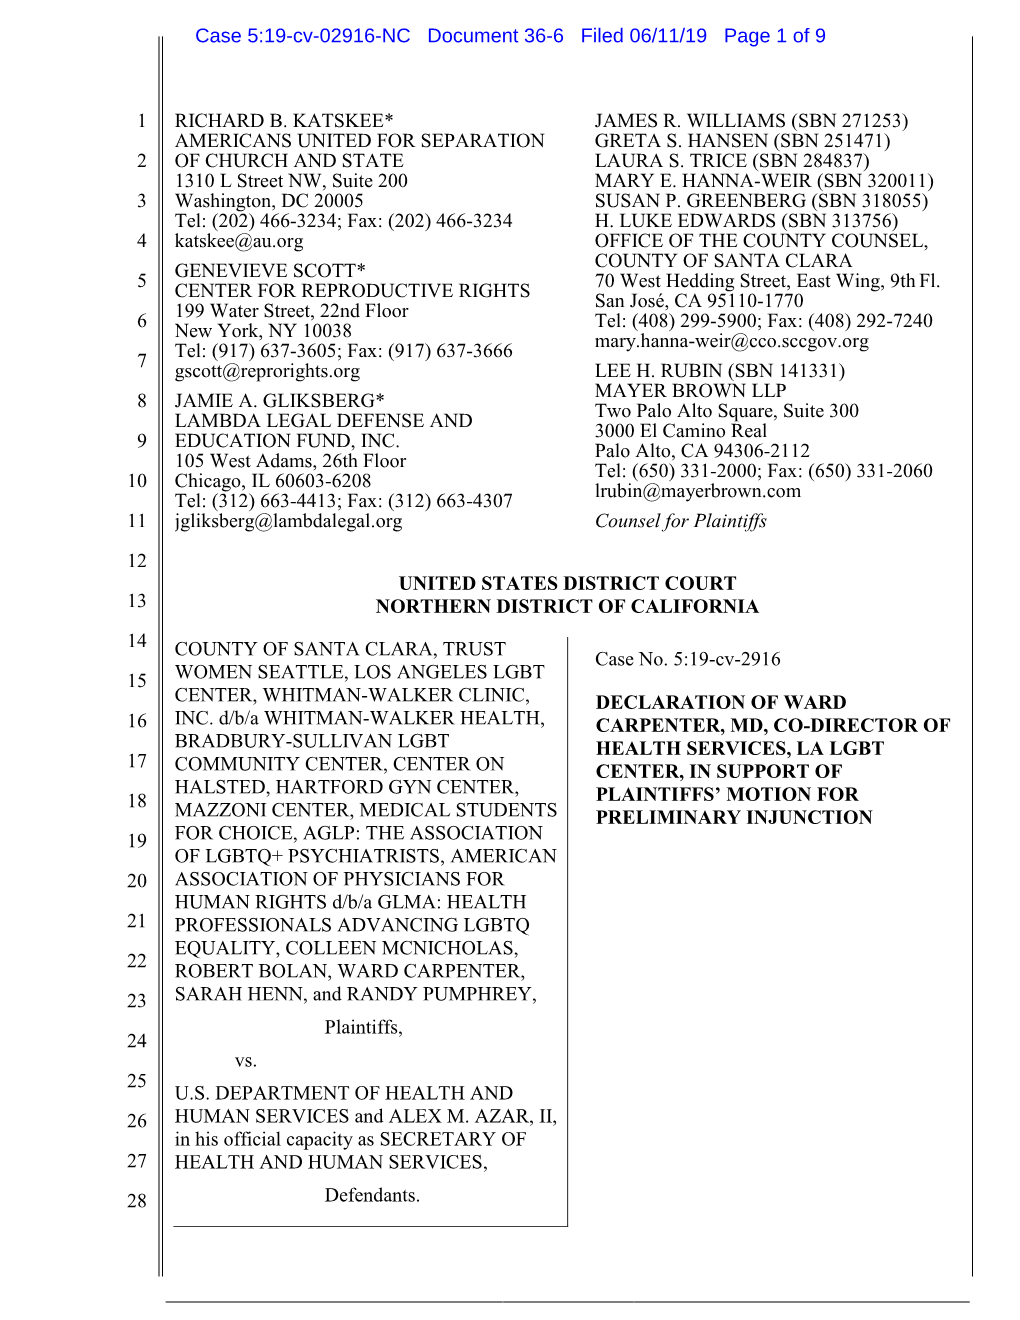 Case 5:19-Cv-02916-NC Document 36-6 Filed 06/11/19 Page 1 of 9